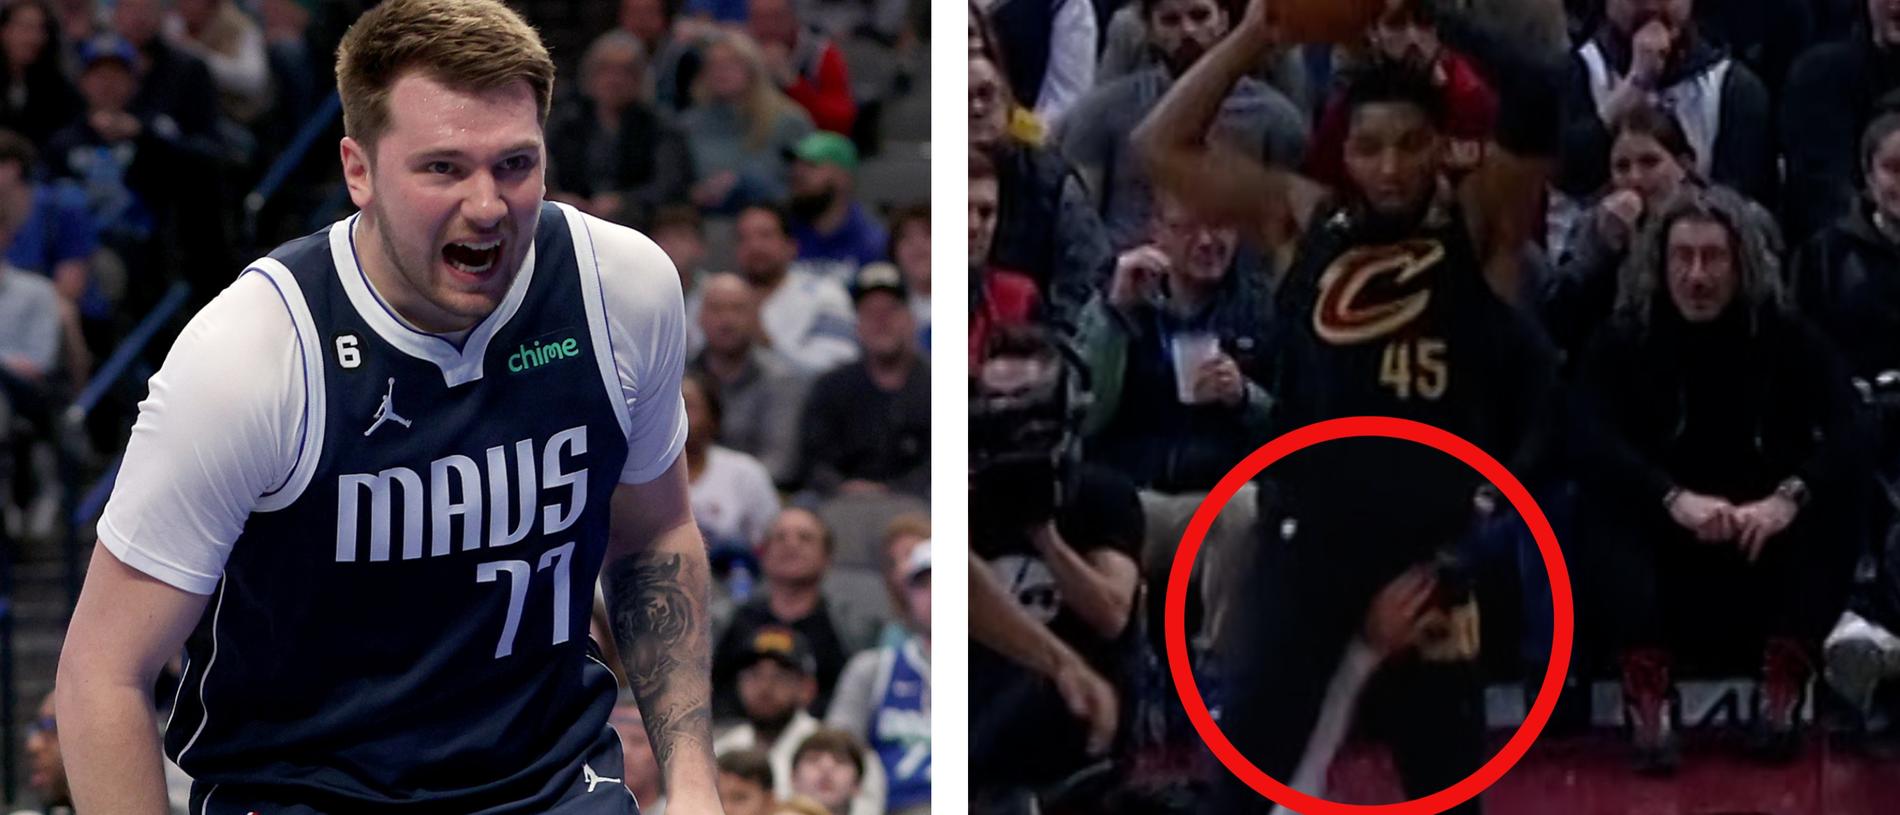 NBA news 2023 Scores, Donovan Mitchell and Dillon Brooks ejected, Cleveland Cavaliers vs Memphis Grizzlies, video, what happened, Luka Doncic, first quarter, Dallas Mavericks vs New Orleans Pelicans